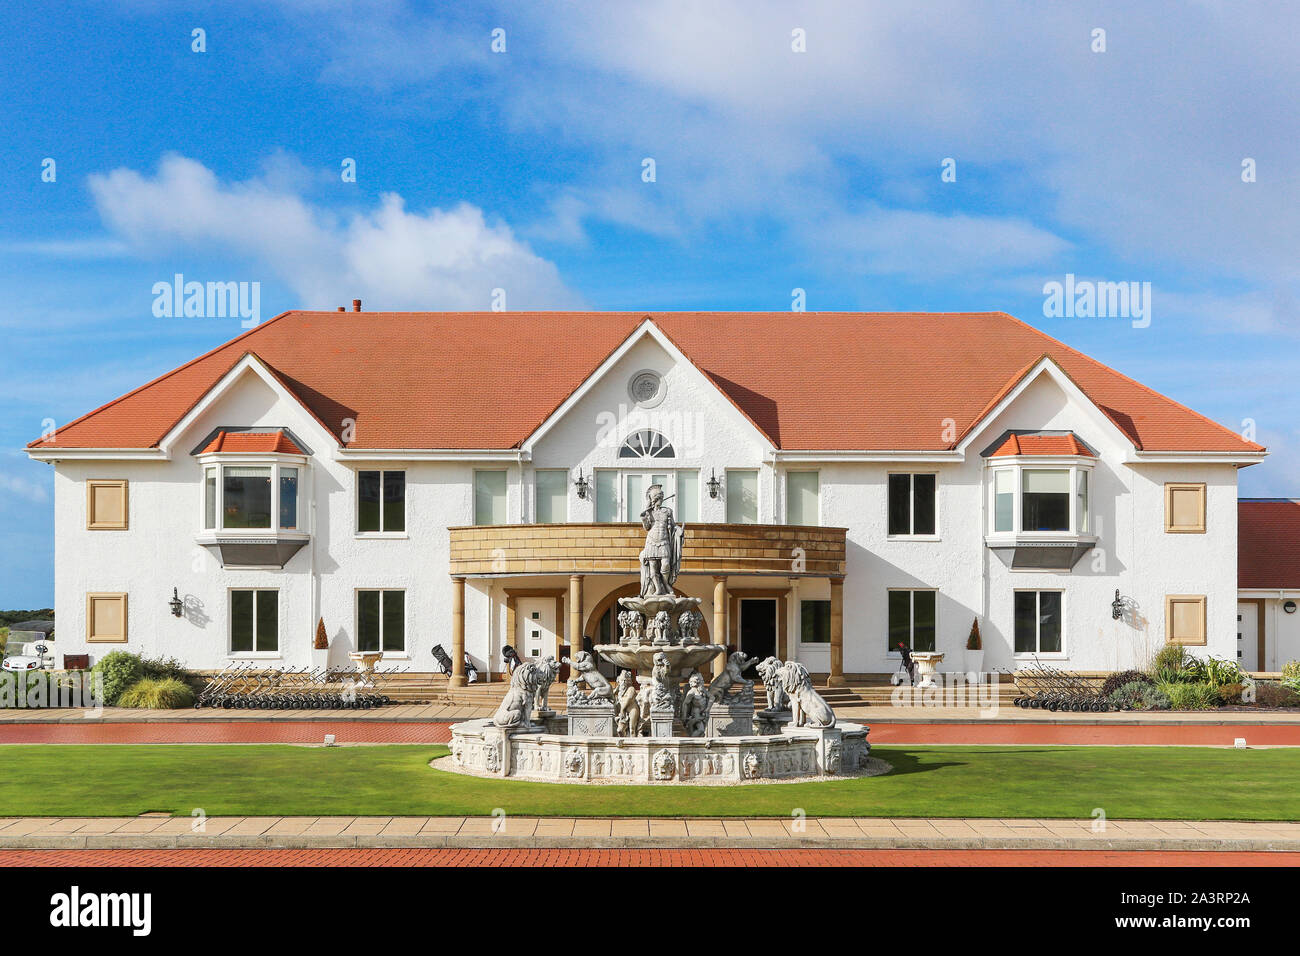 Trump Turnberry golf course clubhouse with the ornate fountain in the foreground, Turnberry, Ayrshire, Scotland, UK Stock Photo